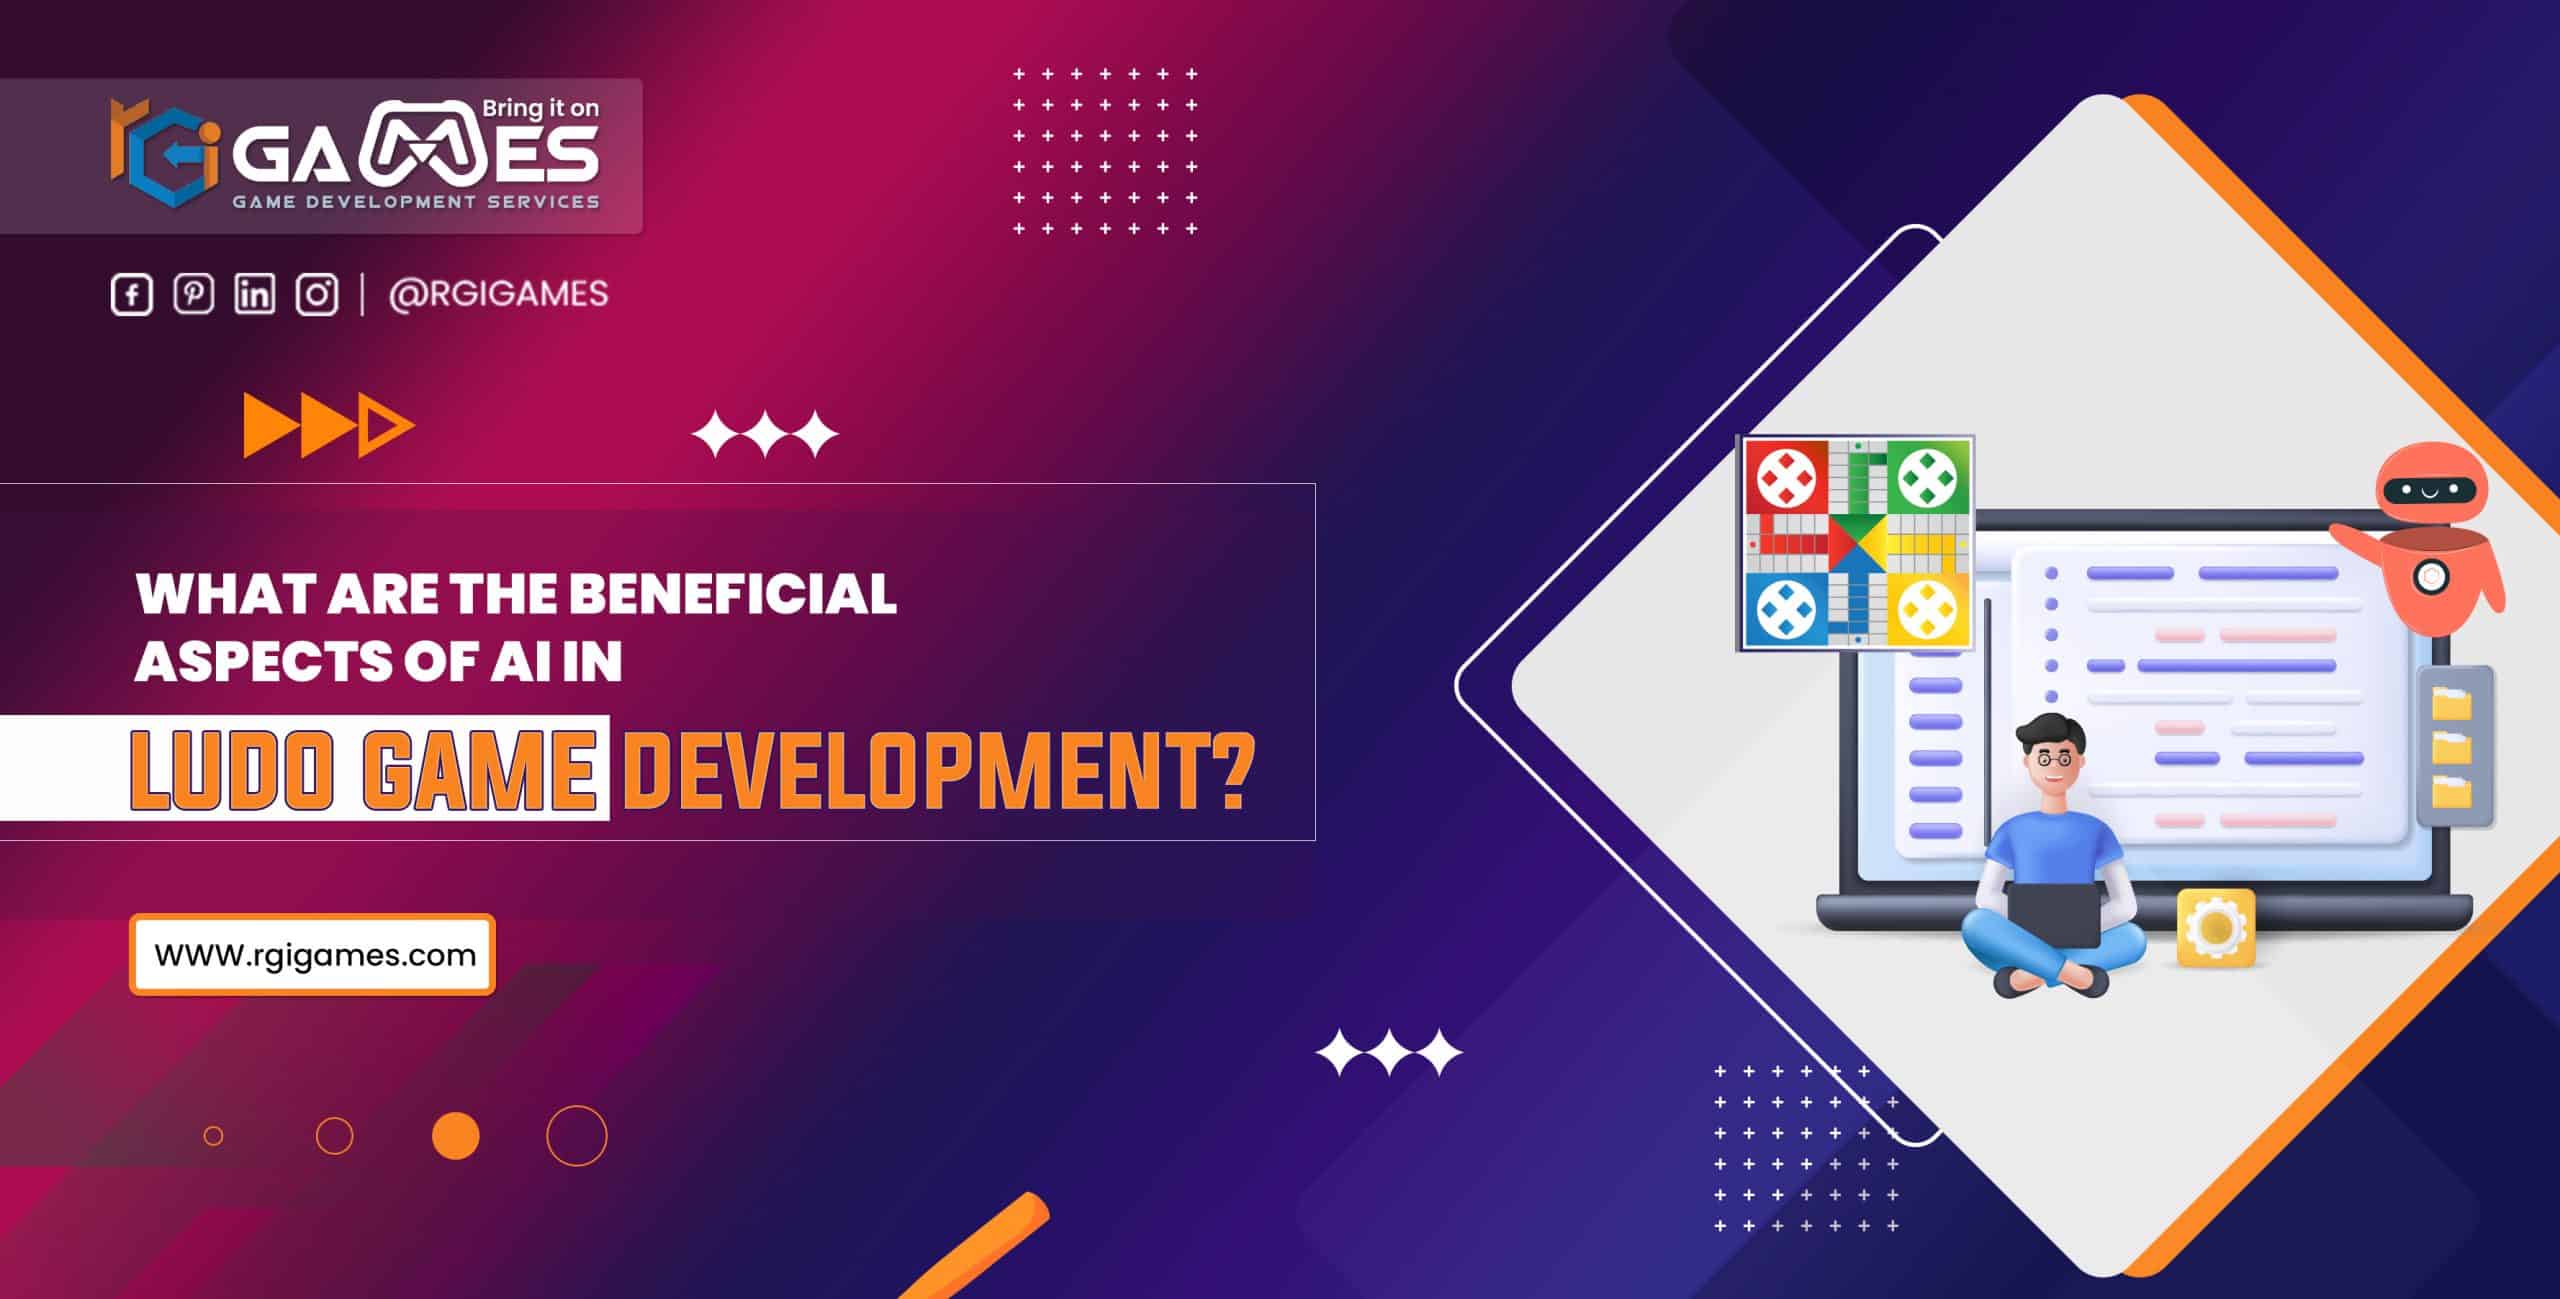 What are the beneficial aspects of AI in Ludo game development